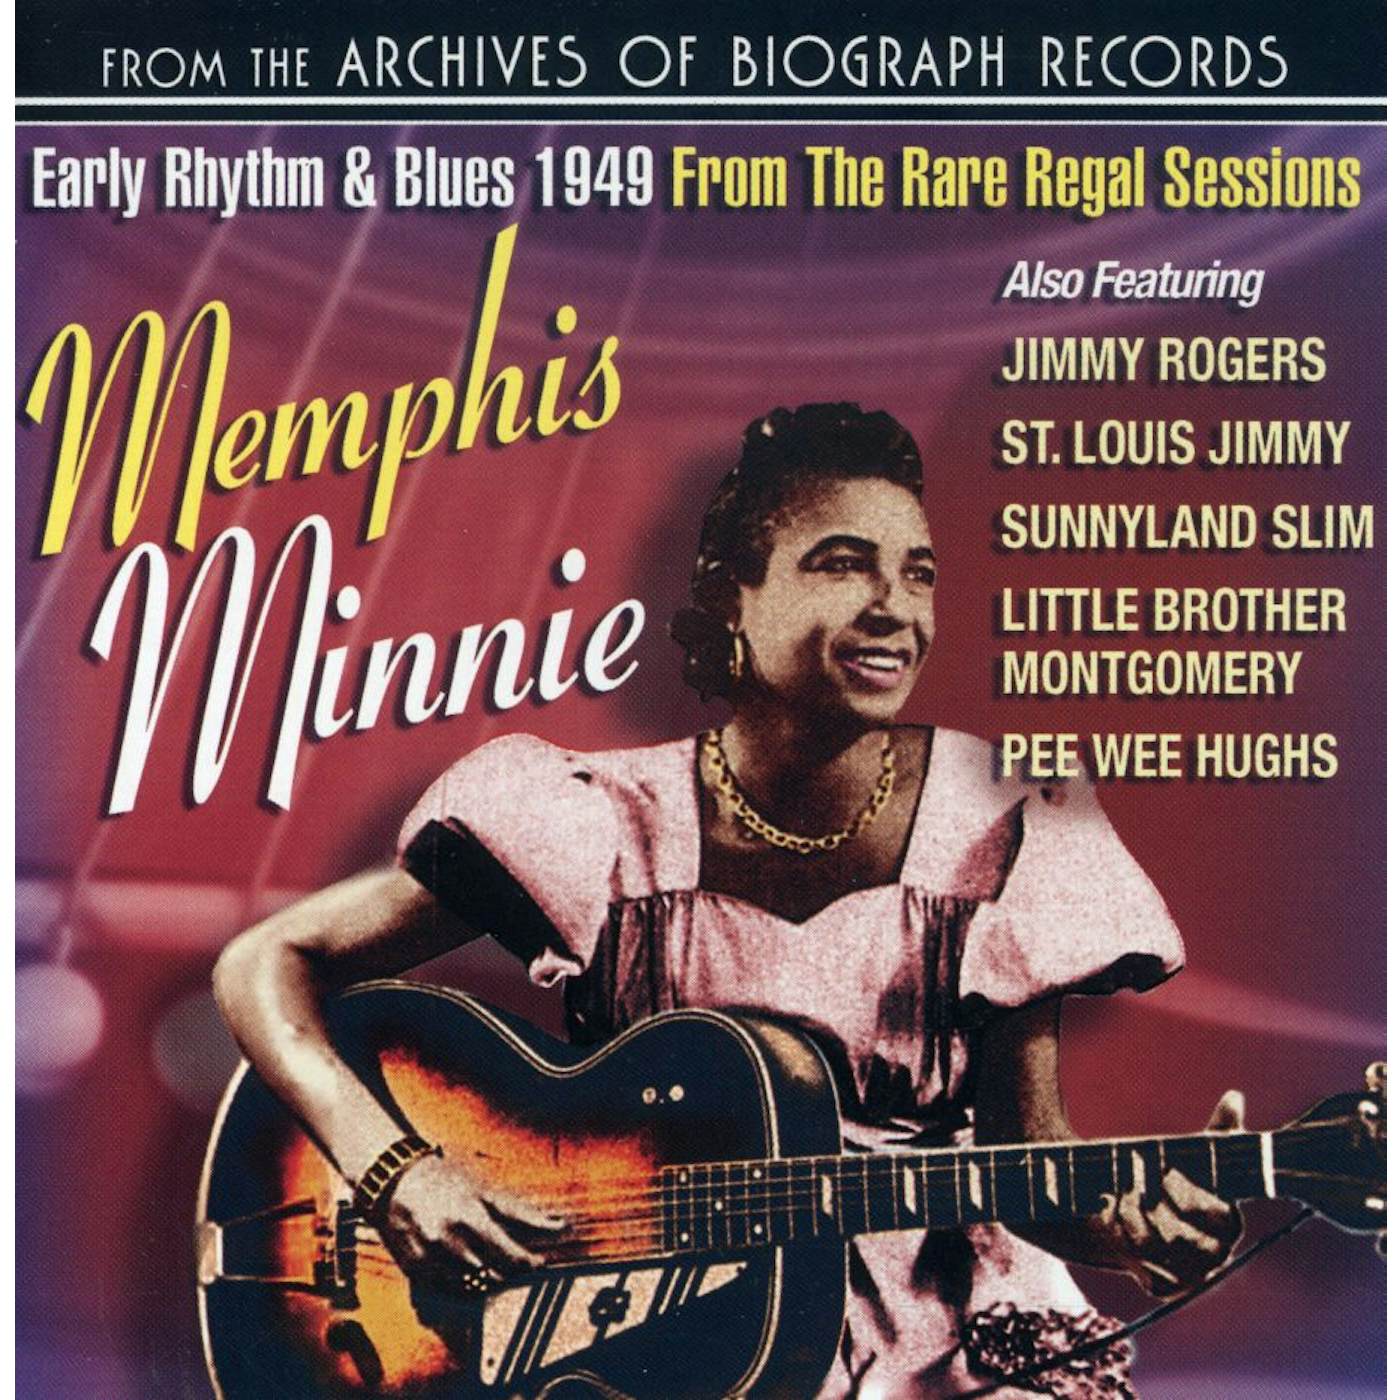 Memphis Minnie EARLY RHYTHM & BLUES 1949 FROM RARE REGAL SESSIONS CD